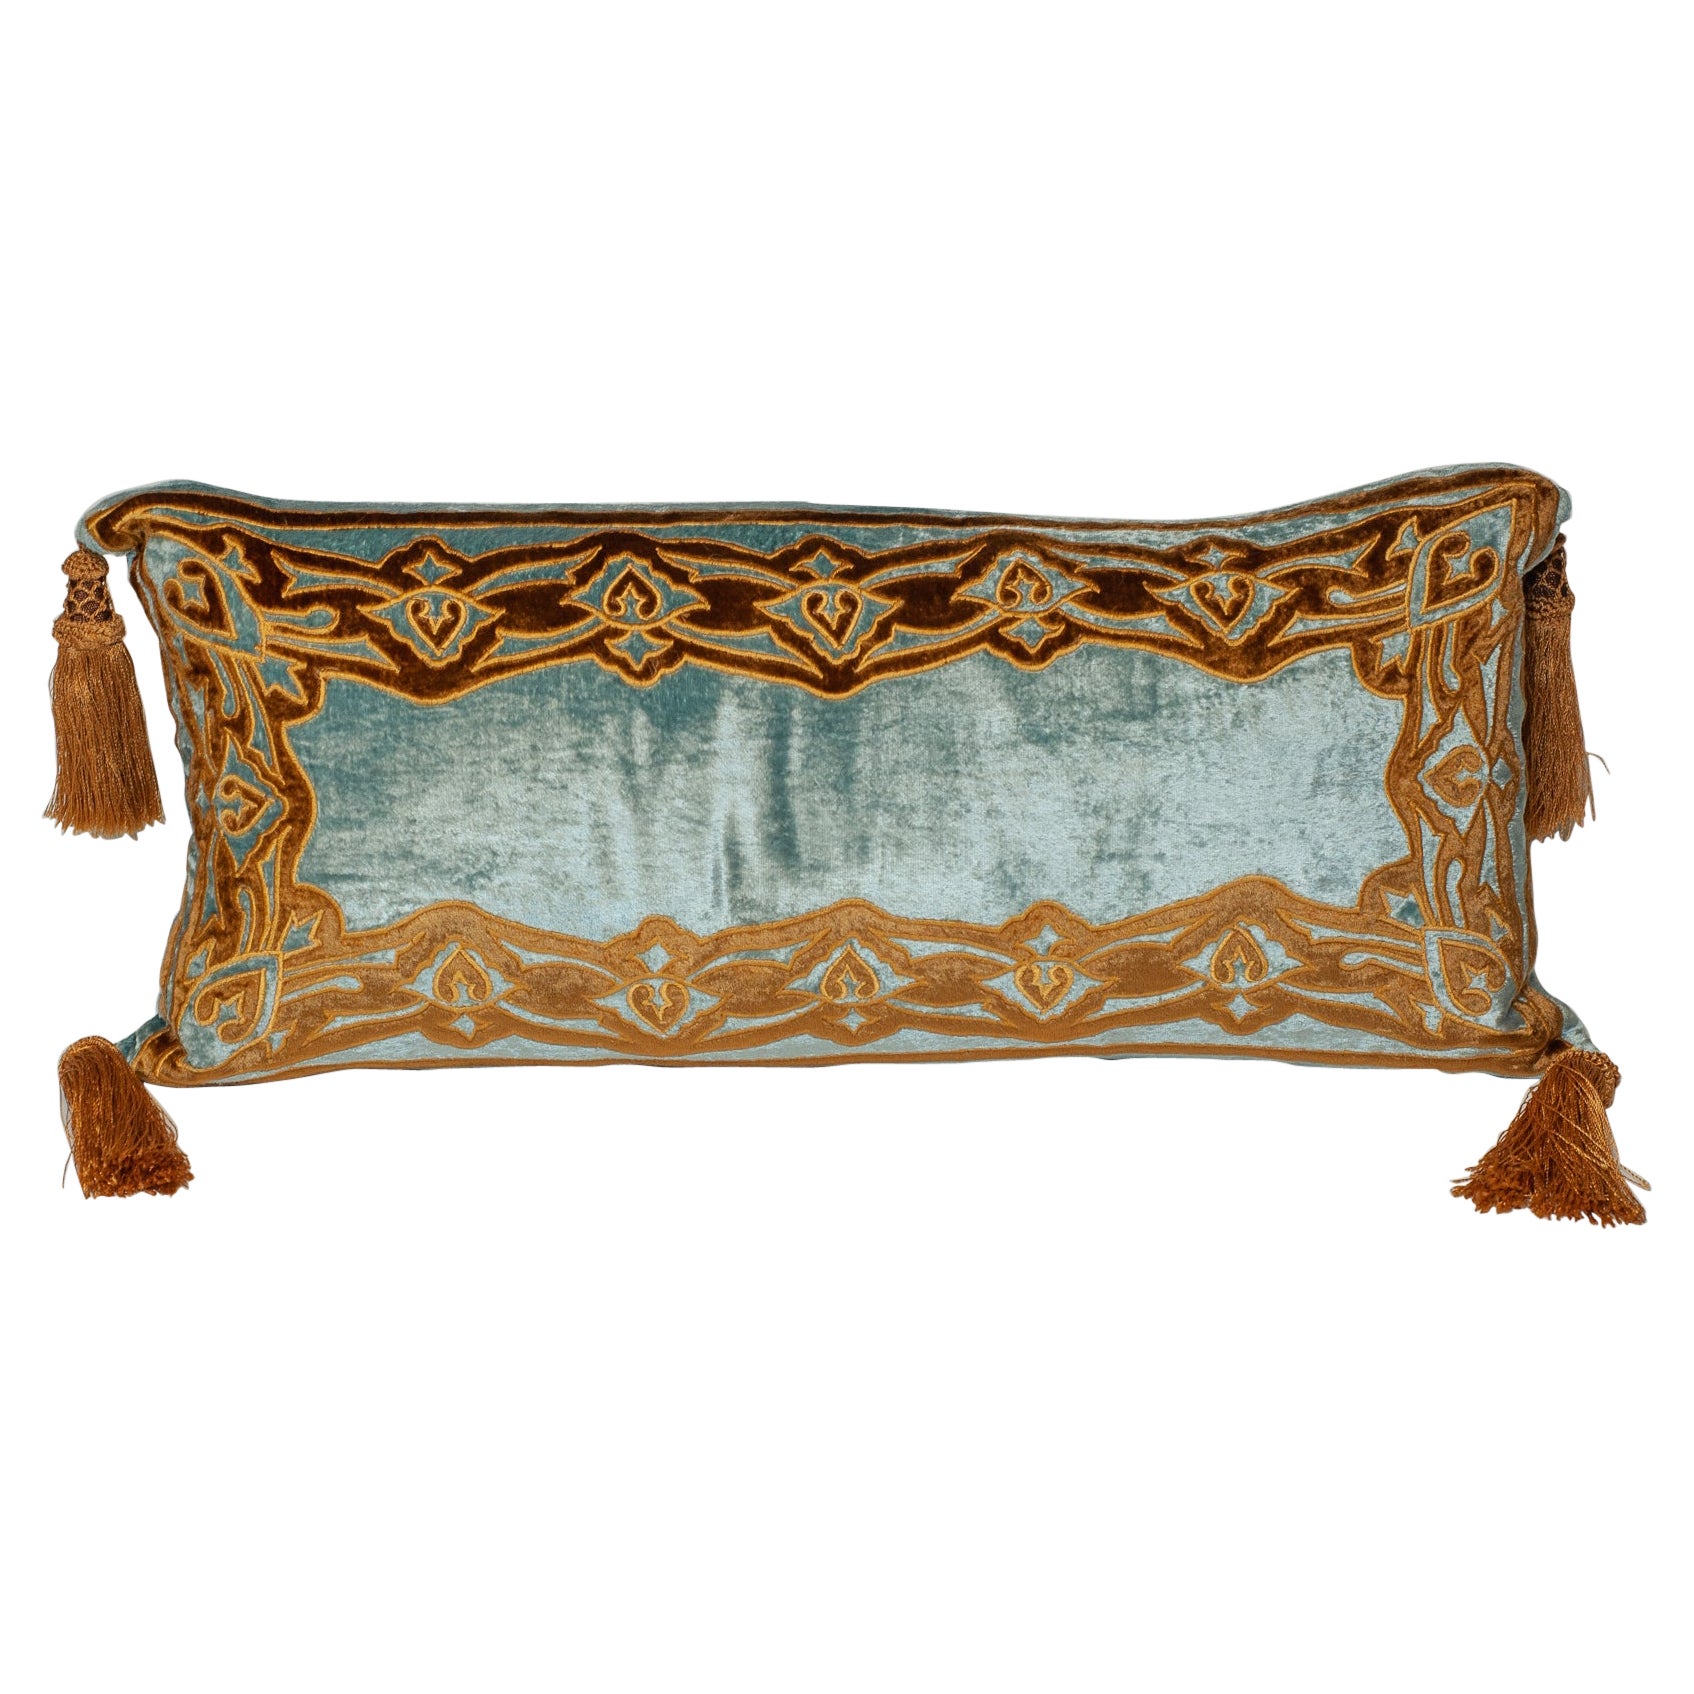 Blue Silk Velvet Pillow with Gold Embroidery and Tassels